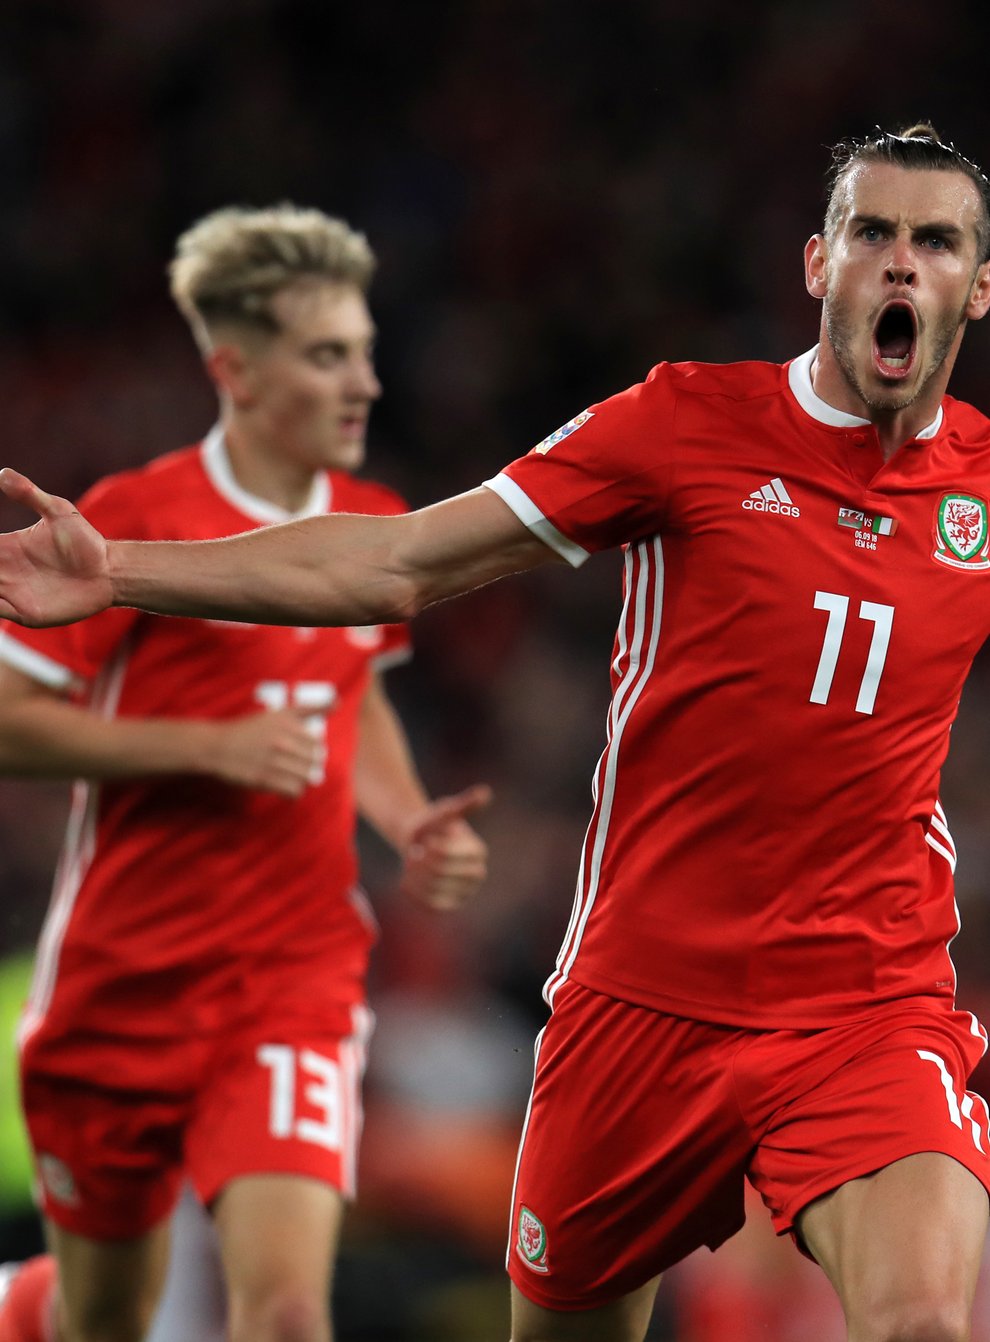 Wales record goalscorer Gareth Bale is set to win his 100th cap on Saturday (Mike Egerton/PA)